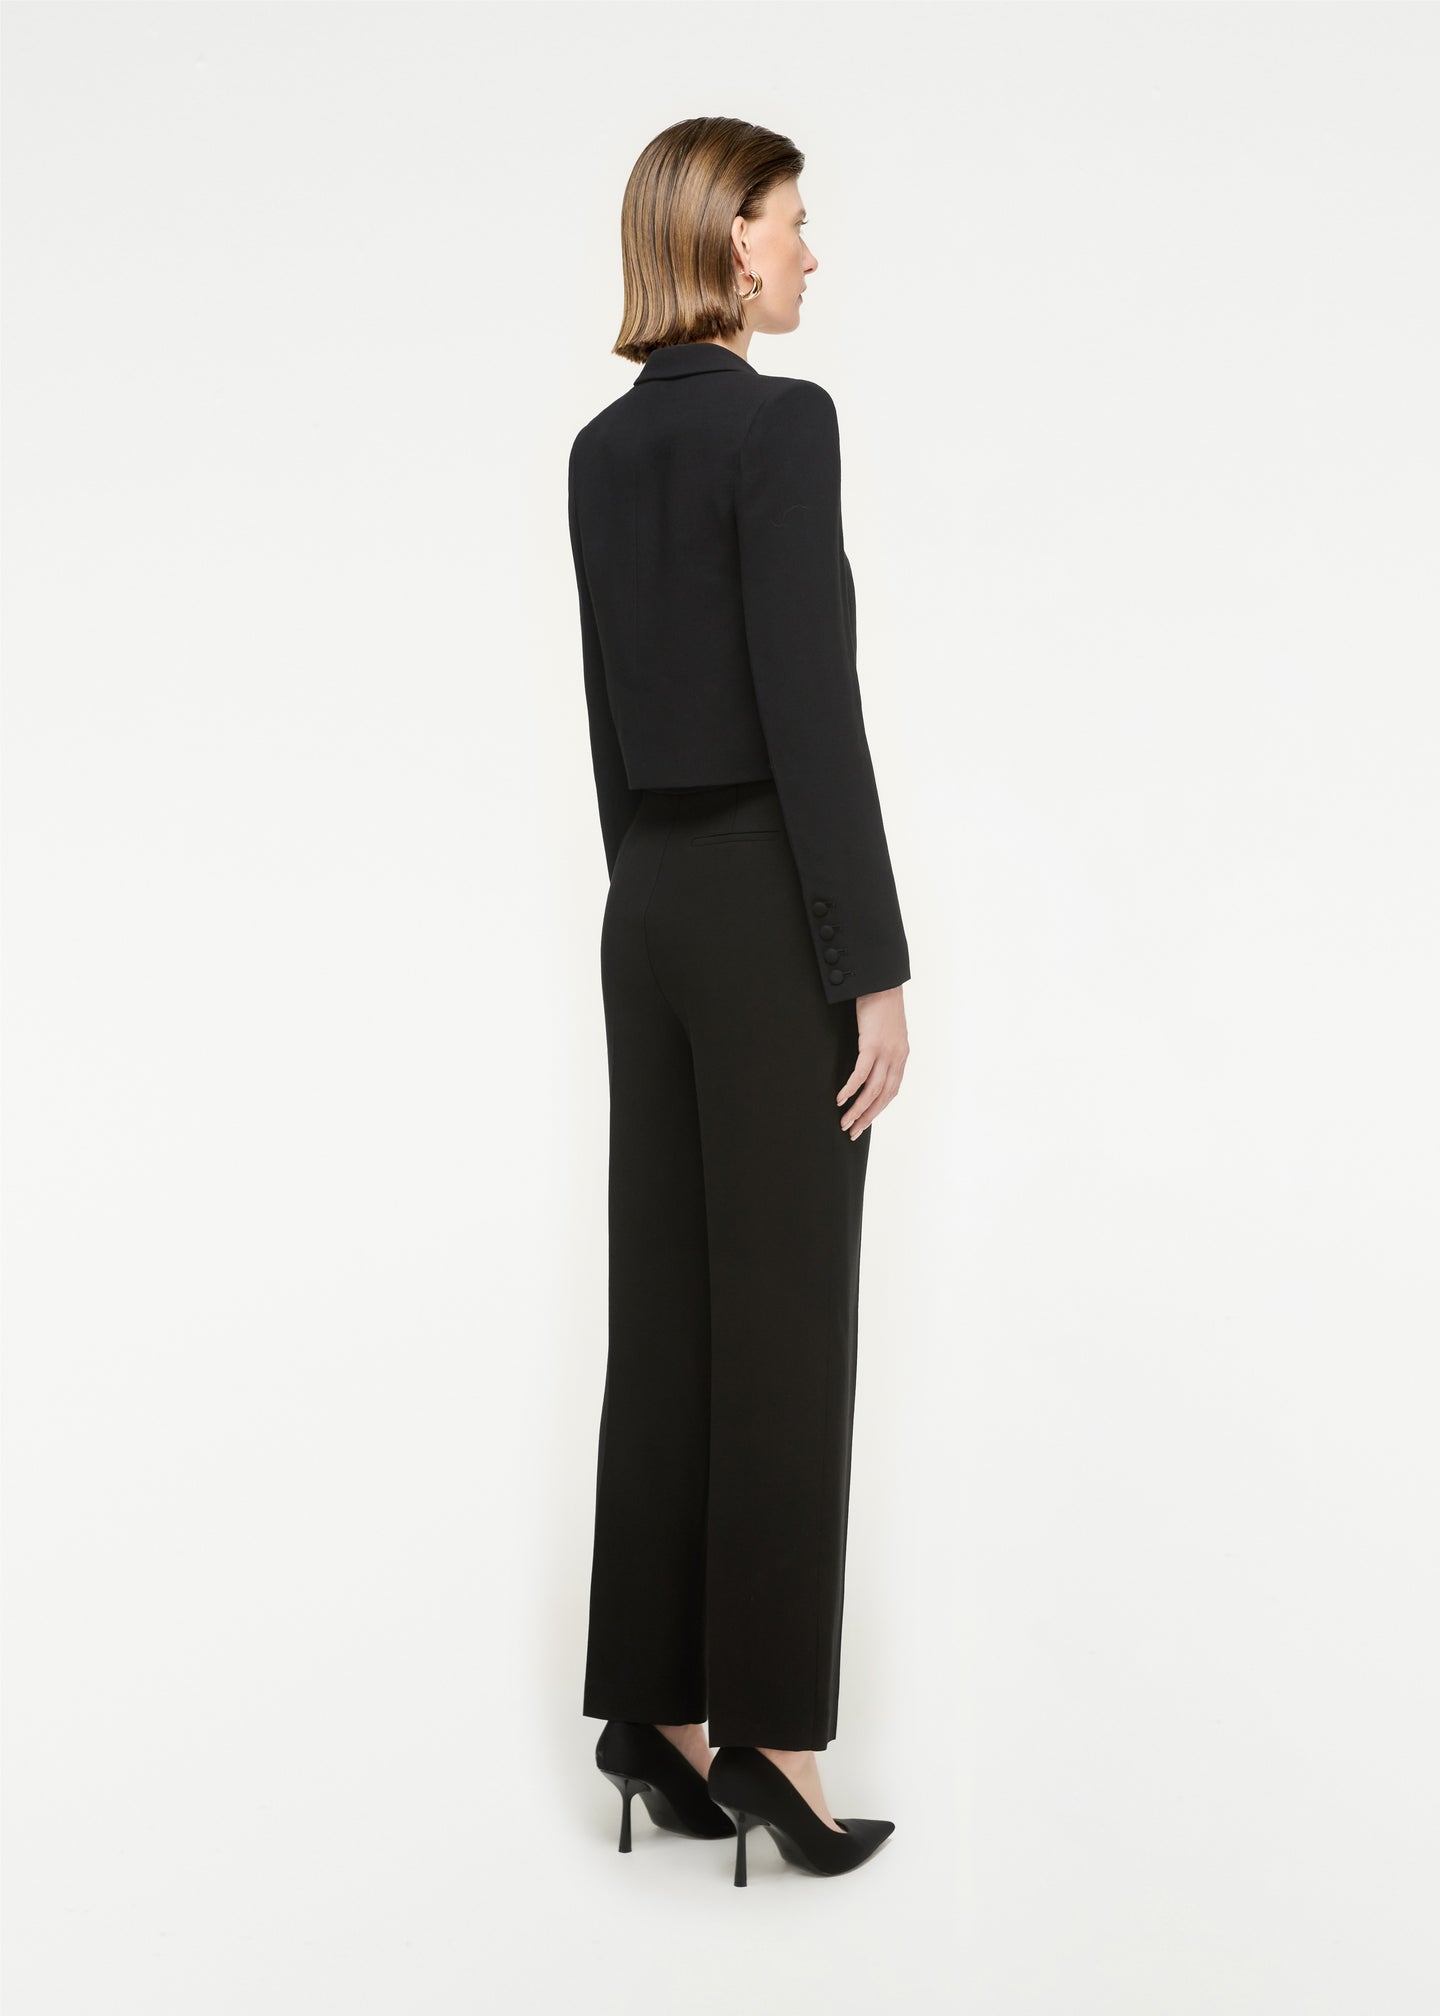 The back of a woman wearing the Wool Silk Cropped Jacket in Black